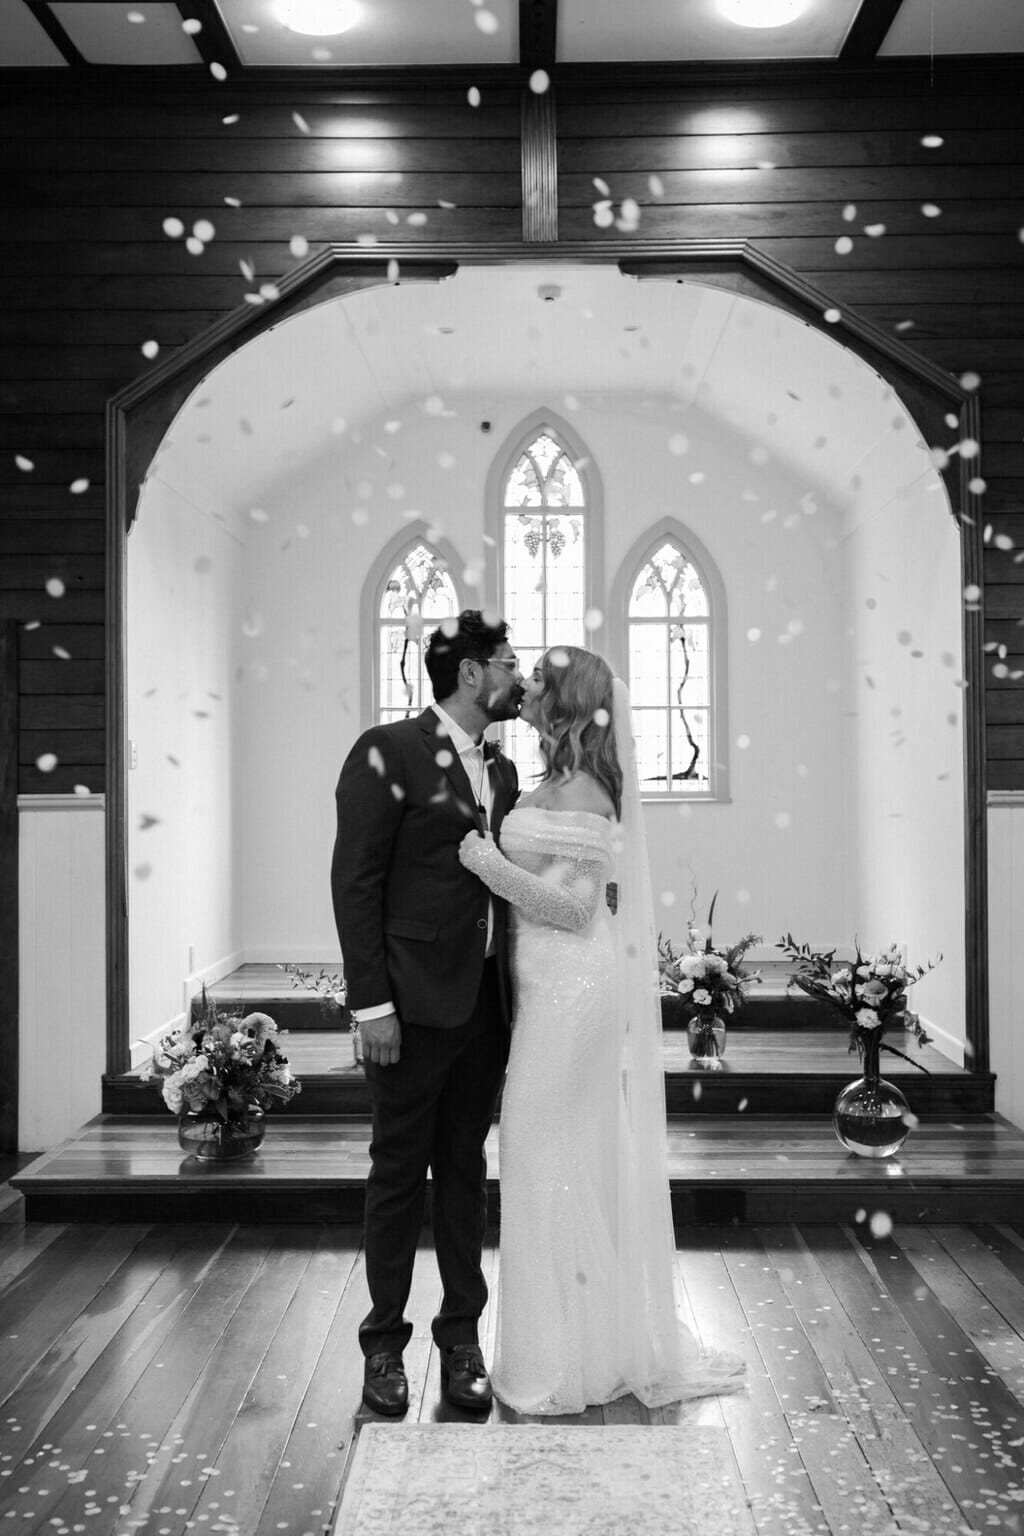 Black and white wedding photo in church